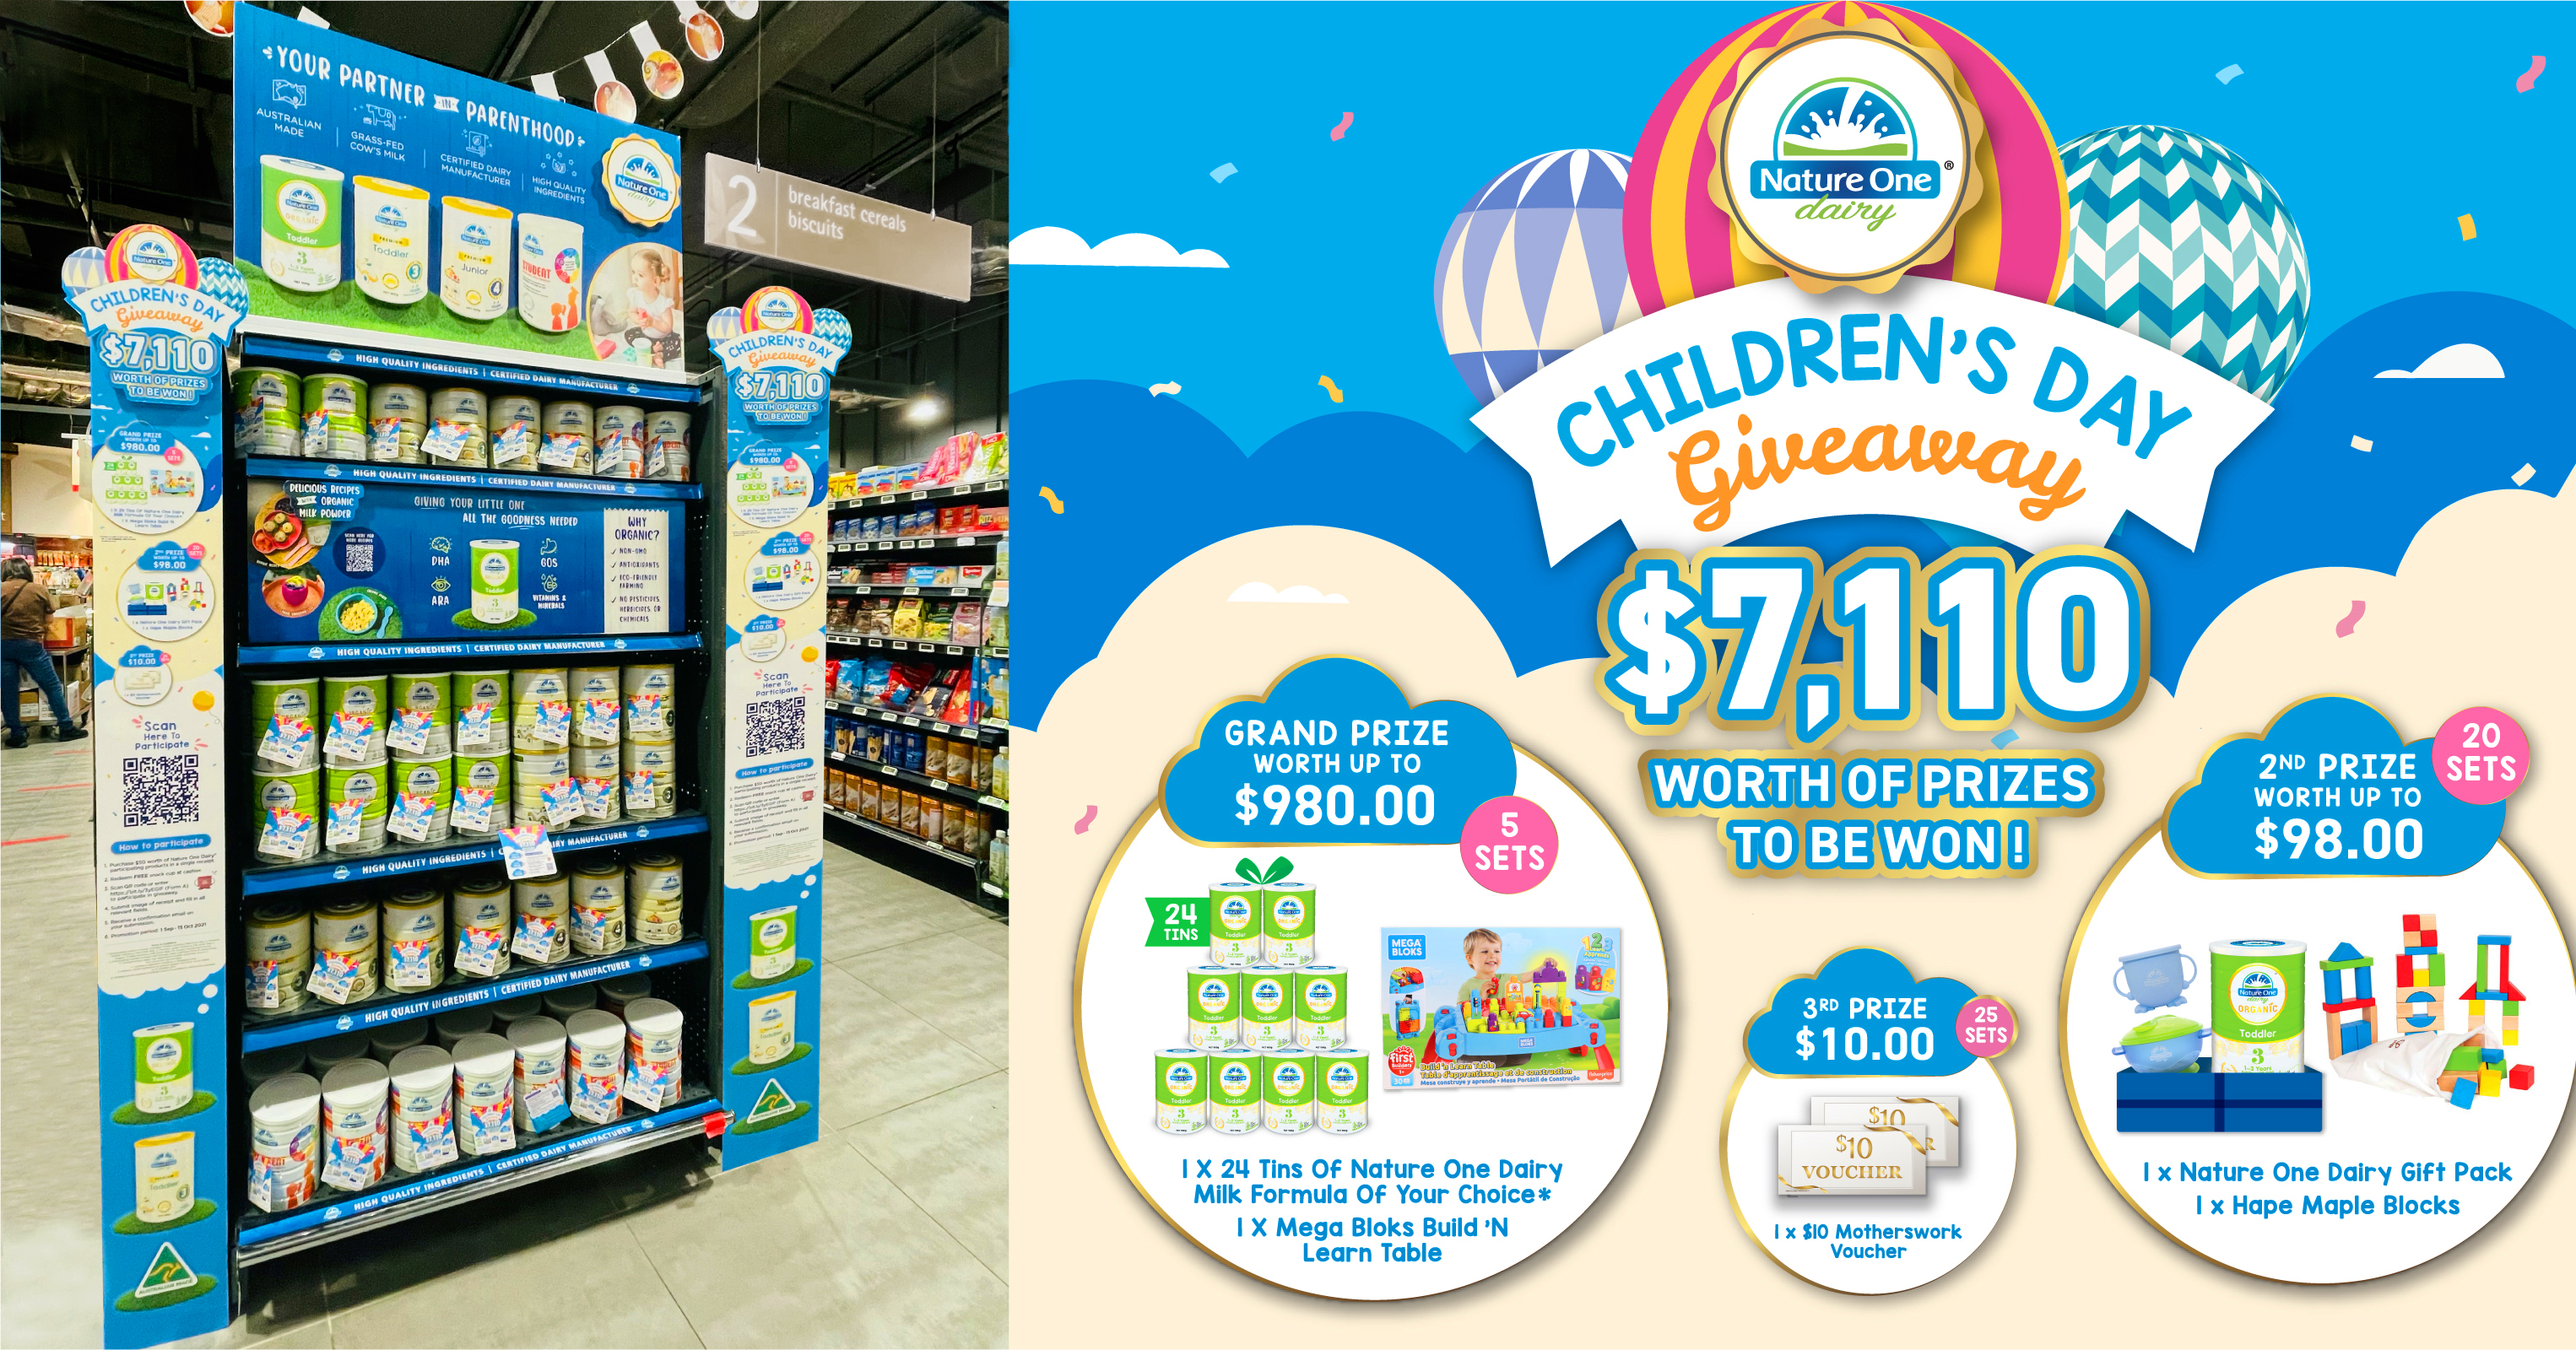 Spend $50 on selected Nature One Dairy® products and get a chance to win prizes worth up to $980!